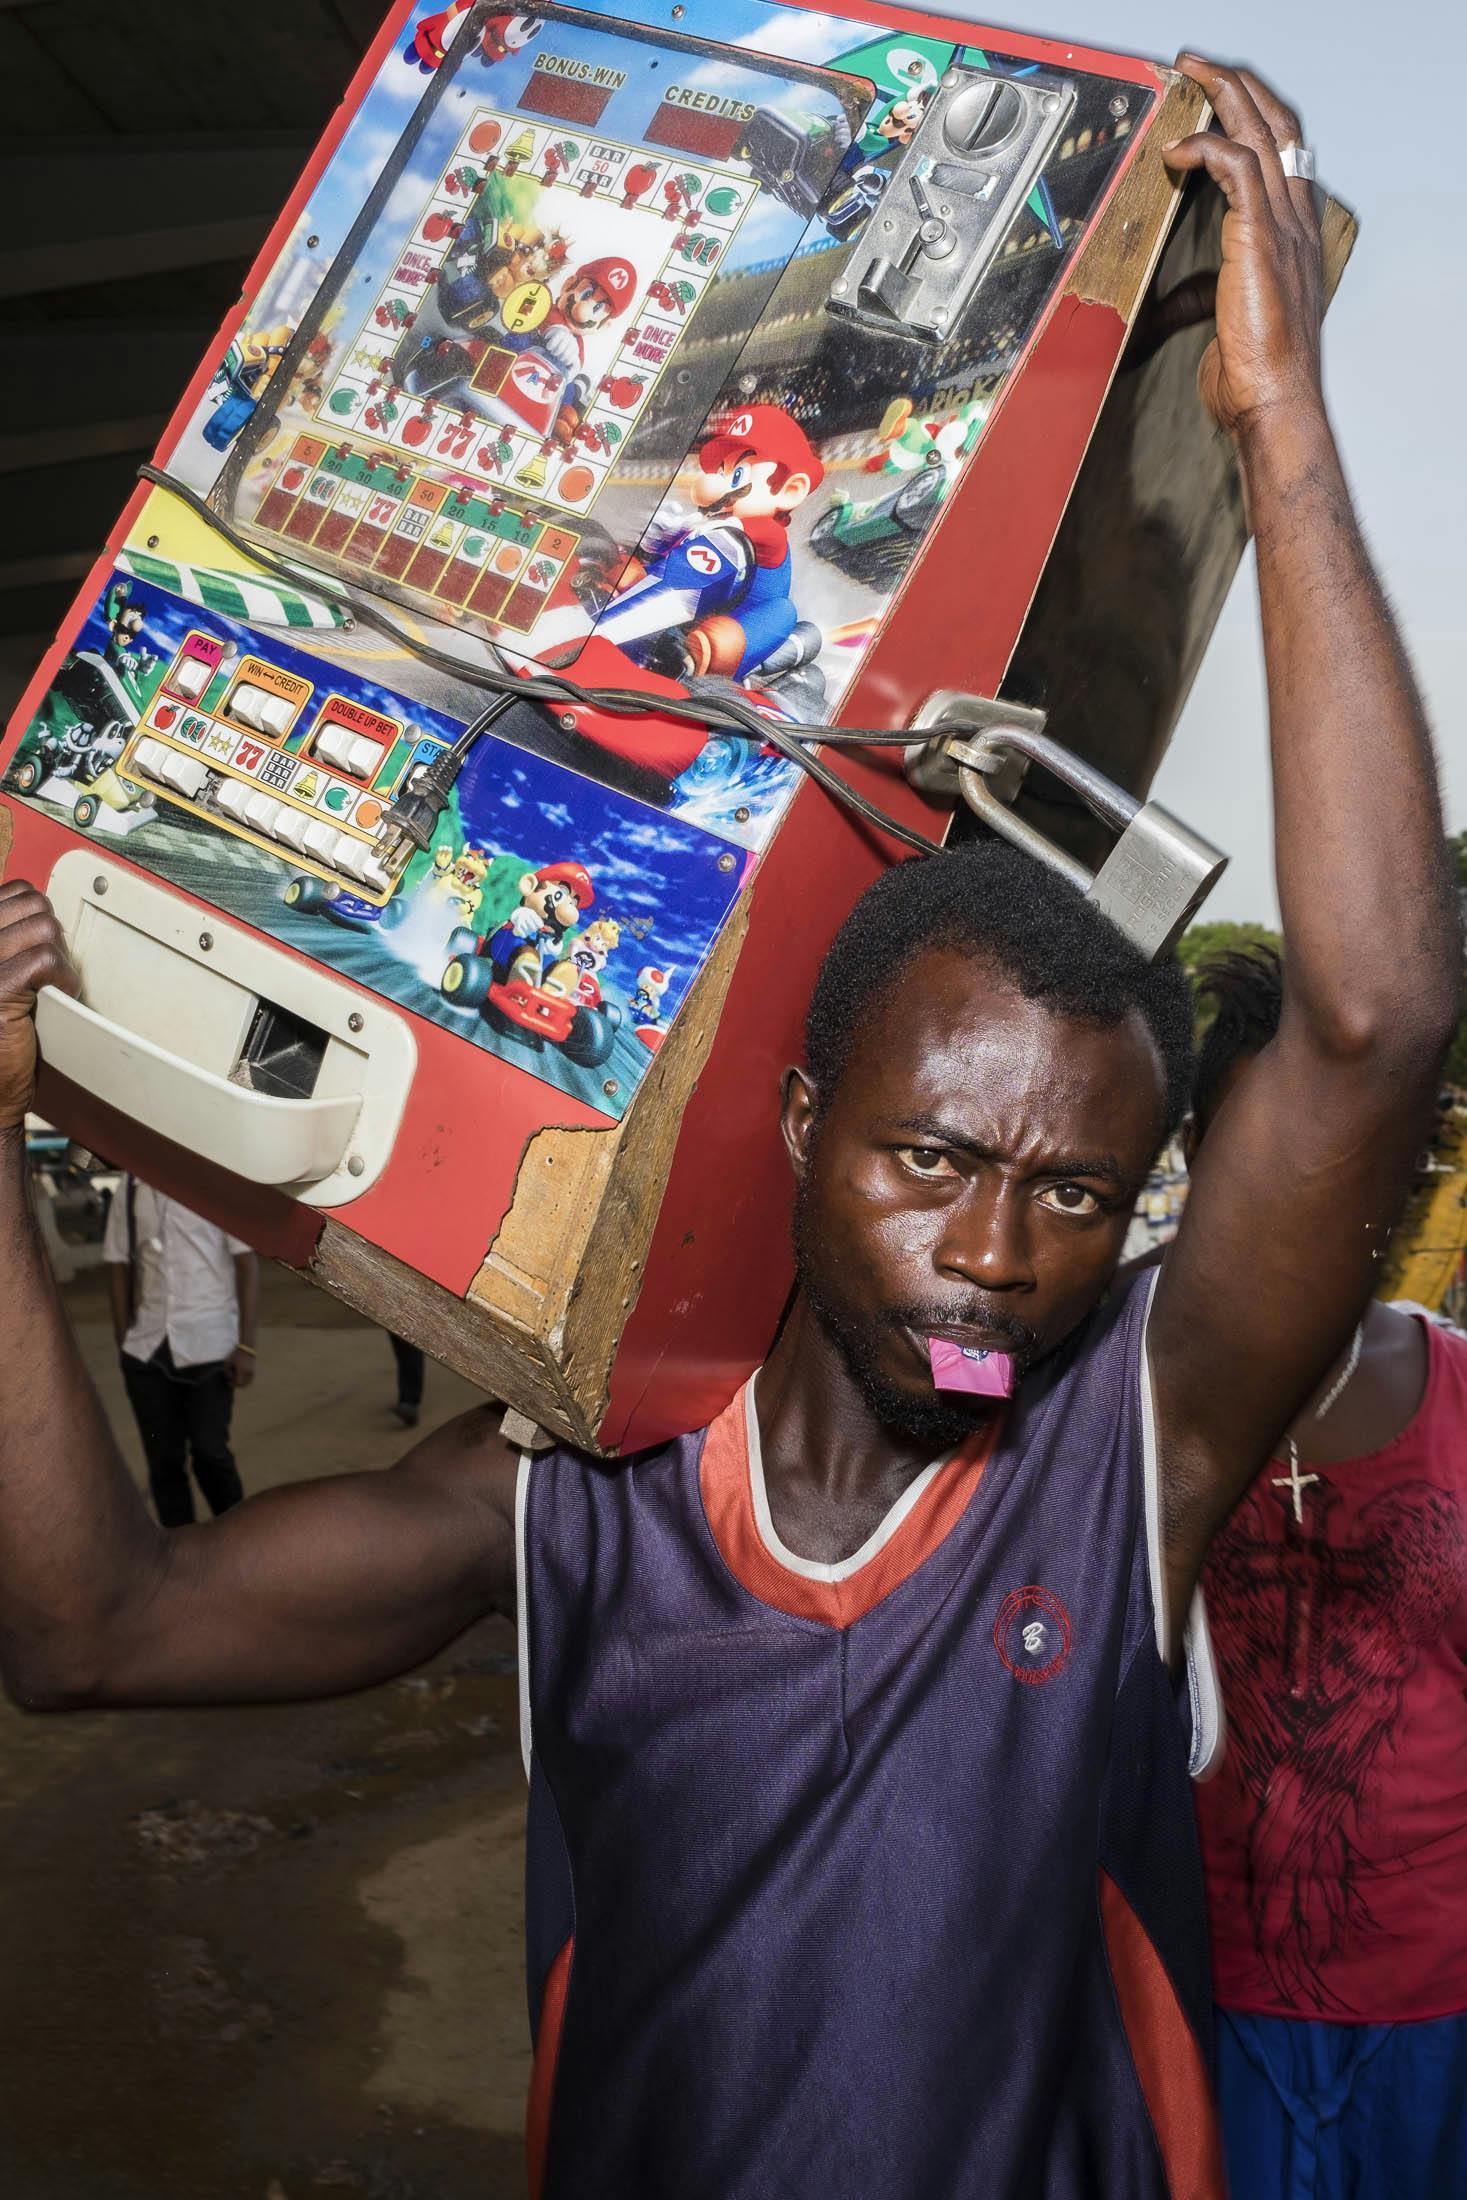 Man carrying super mario machine on the street